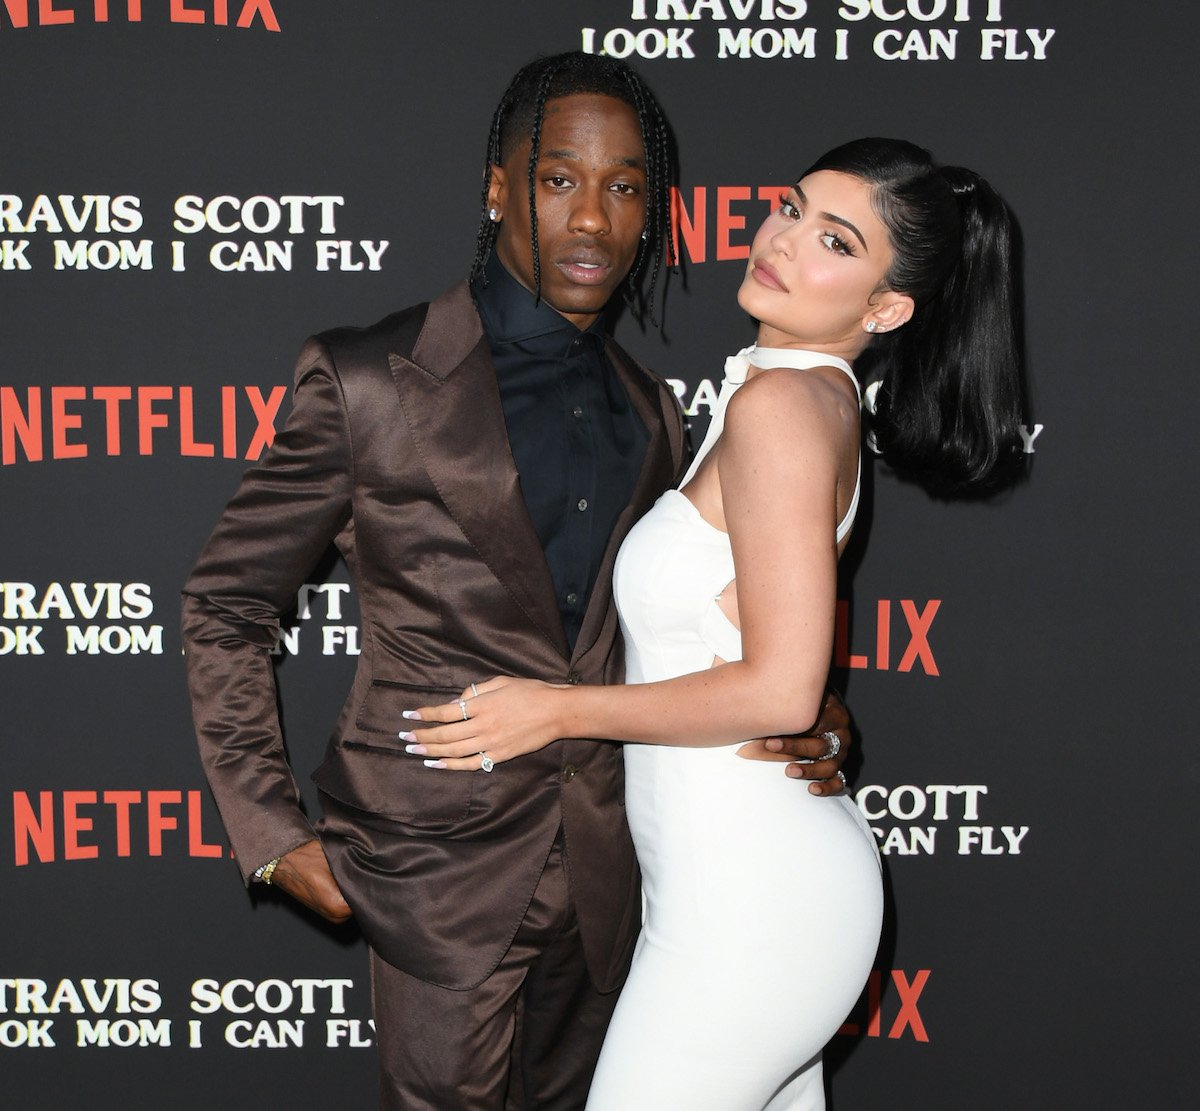 Travis Scott and Kylie Jenner pose together at an event.